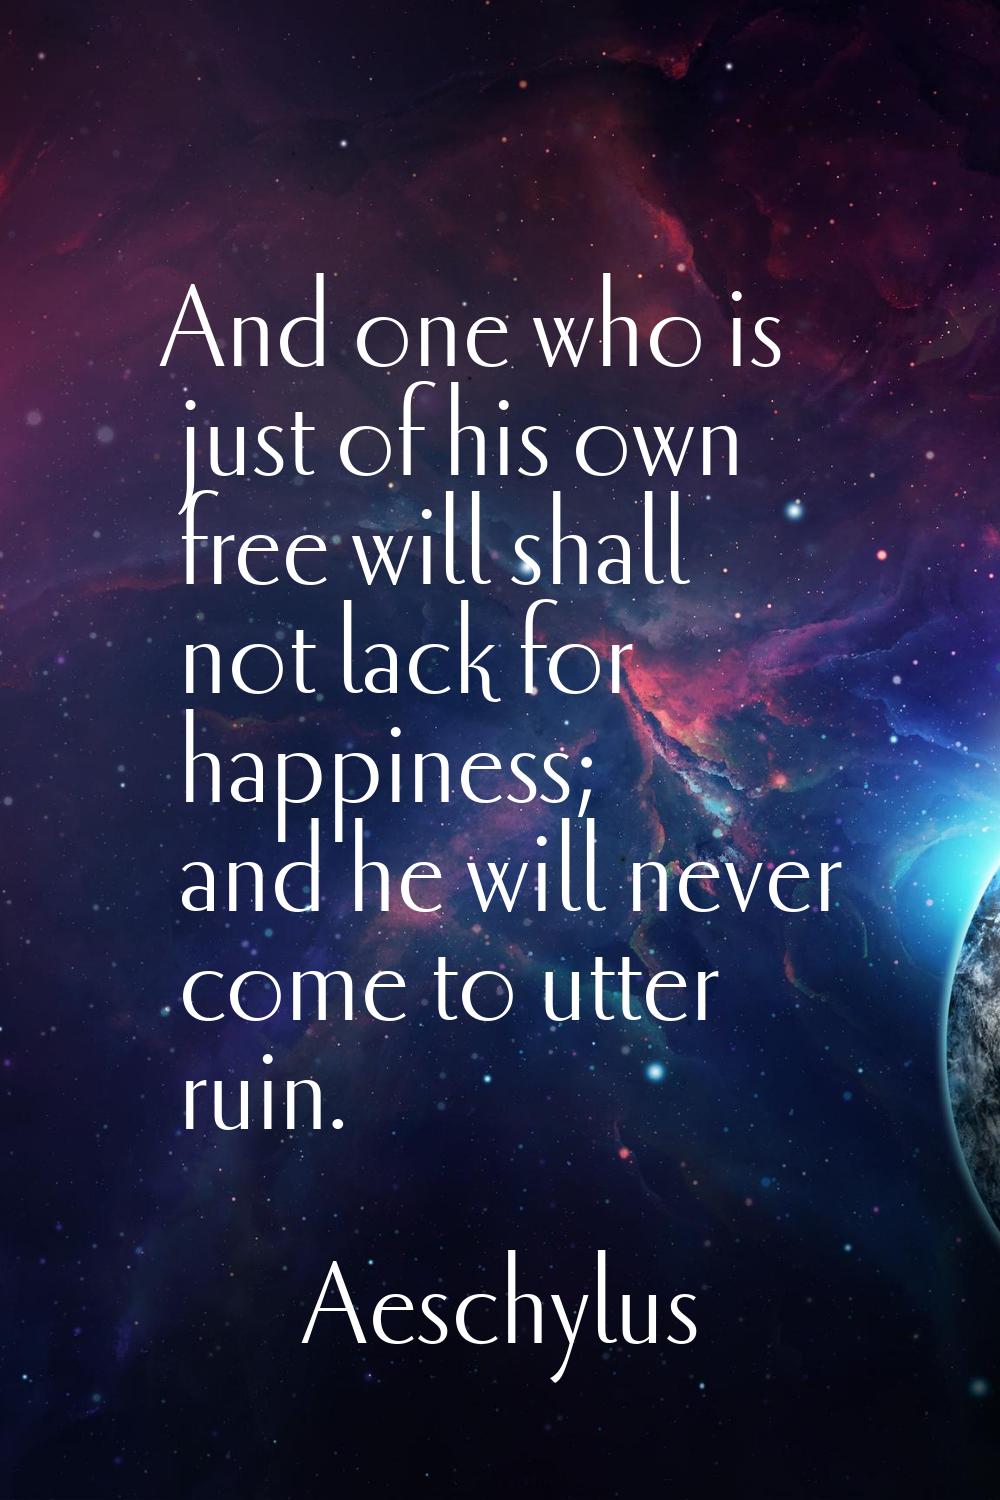 And one who is just of his own free will shall not lack for happiness; and he will never come to ut